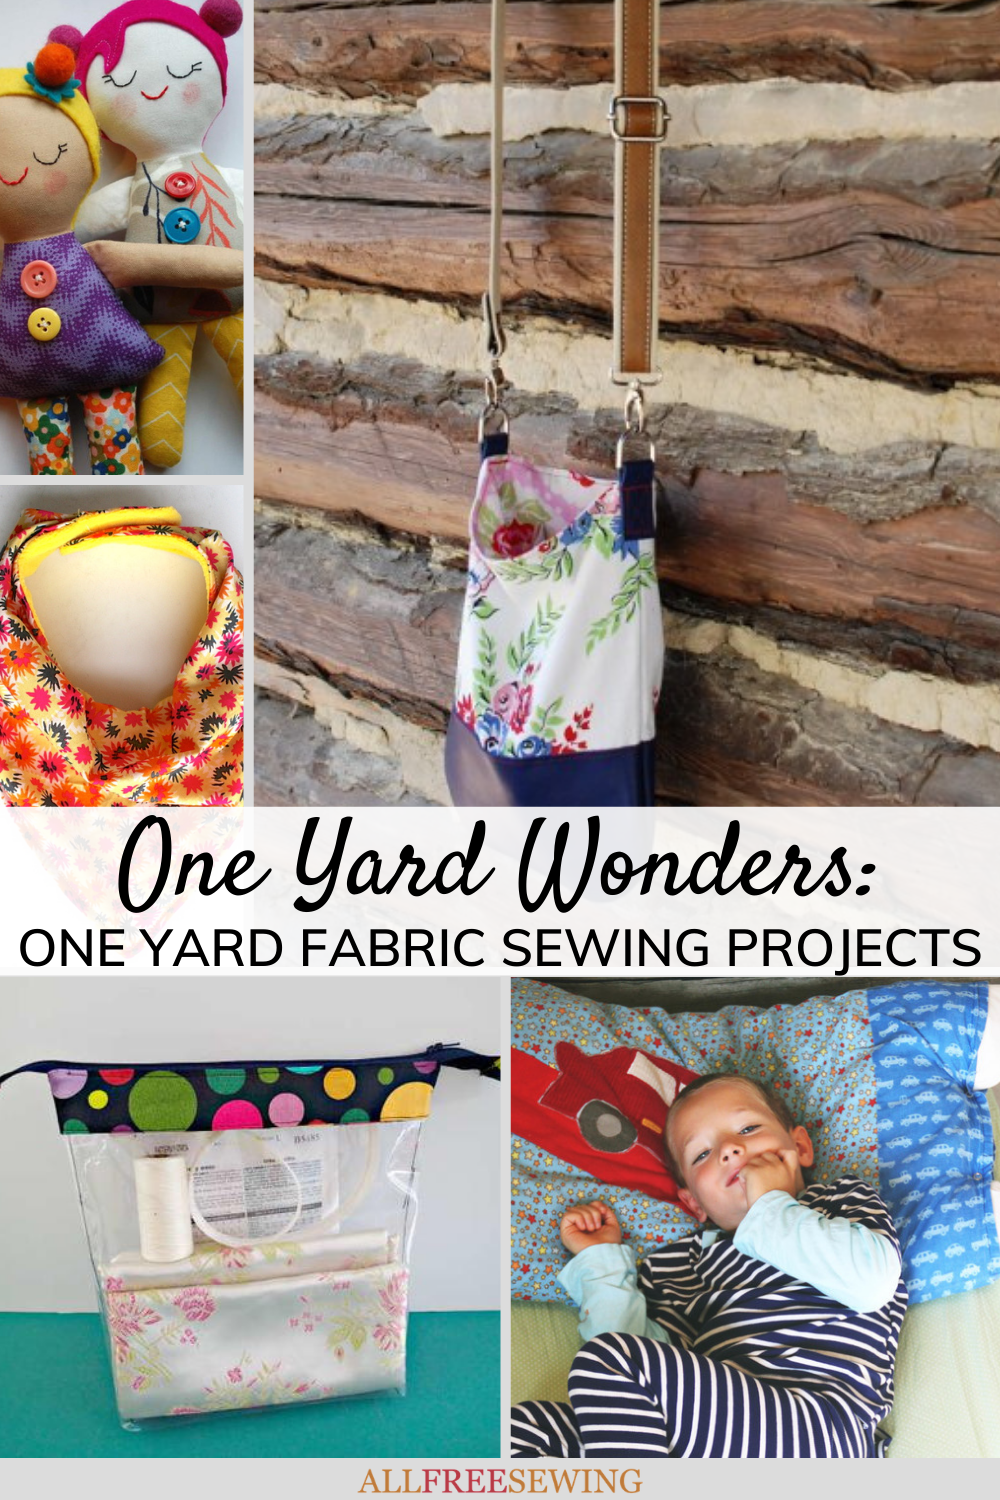 One Yard Wonders: 26+ One Yard Fabric Sewing Projects